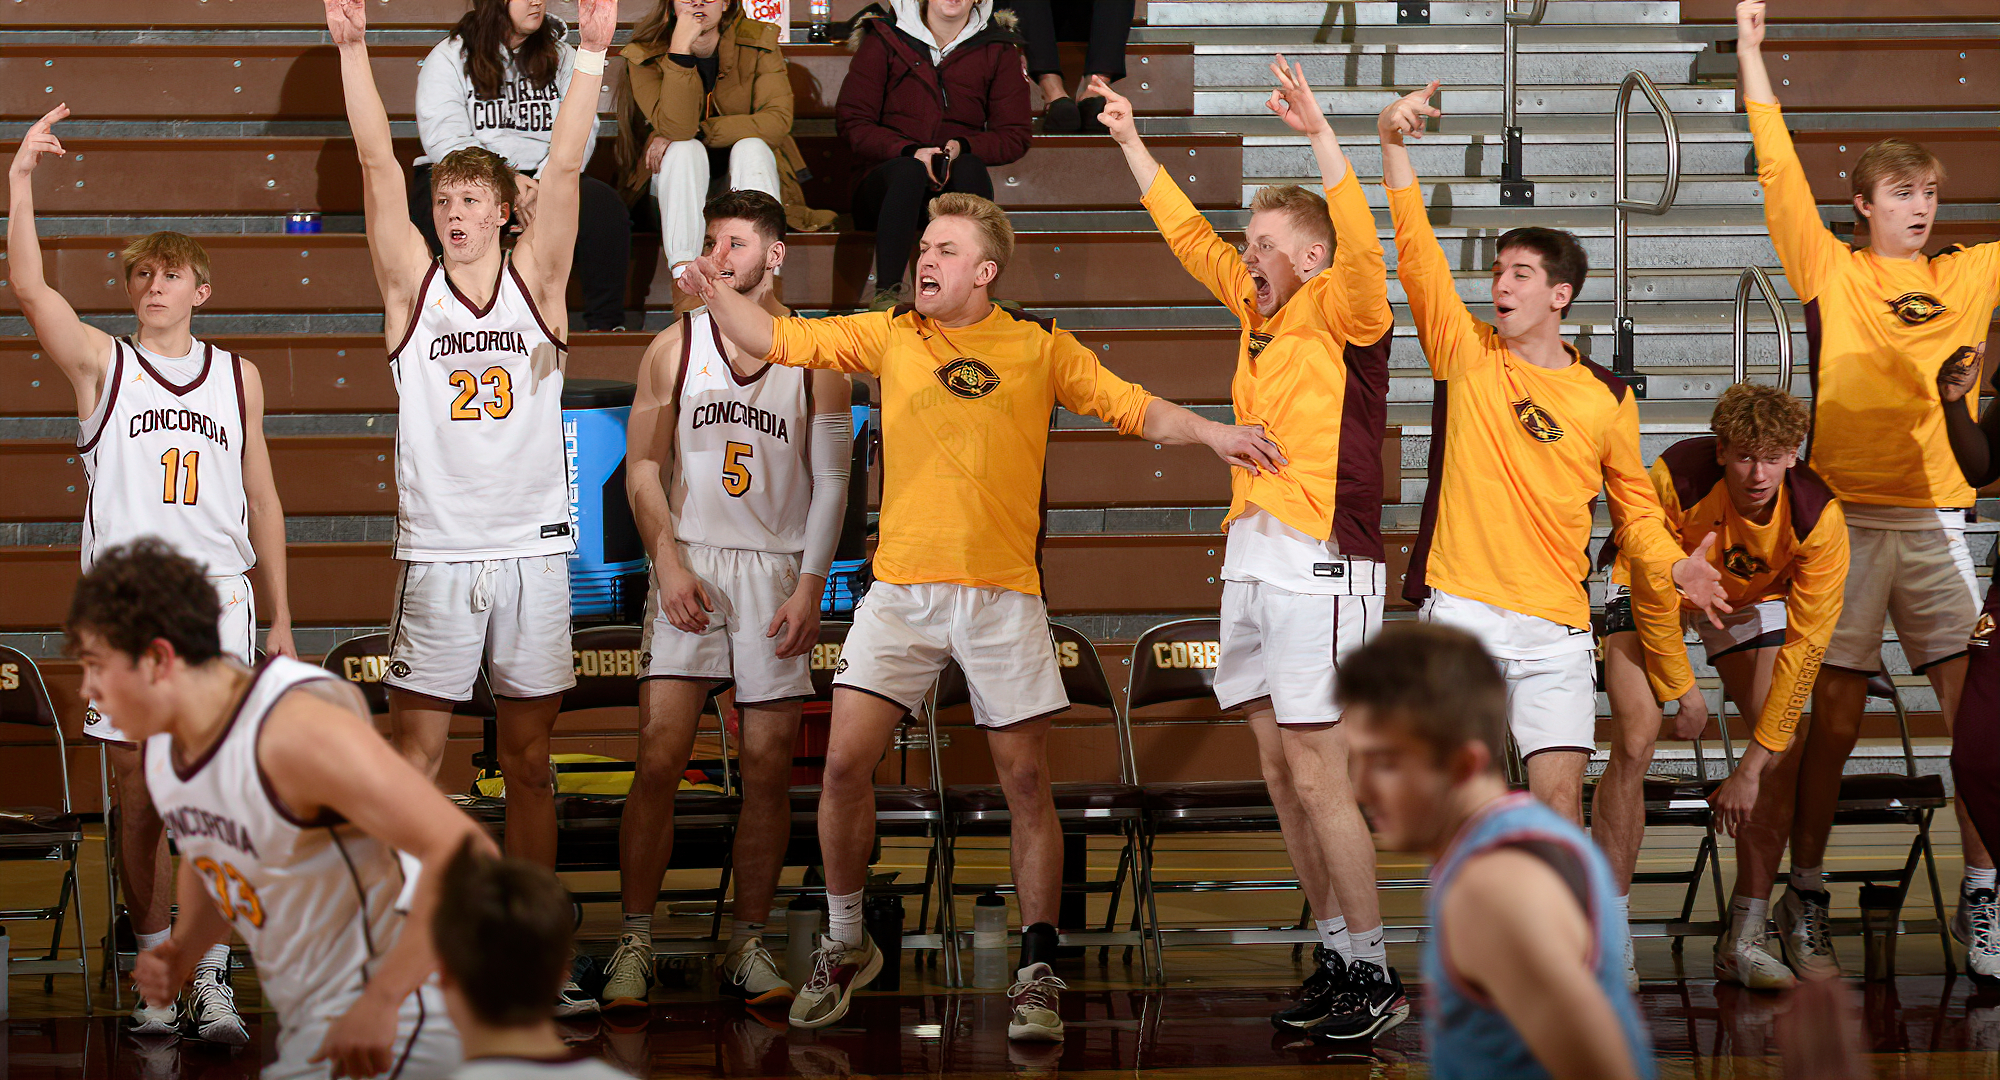 Concordia celebrates a huge basket during their 81-76 win over St. John's at home.